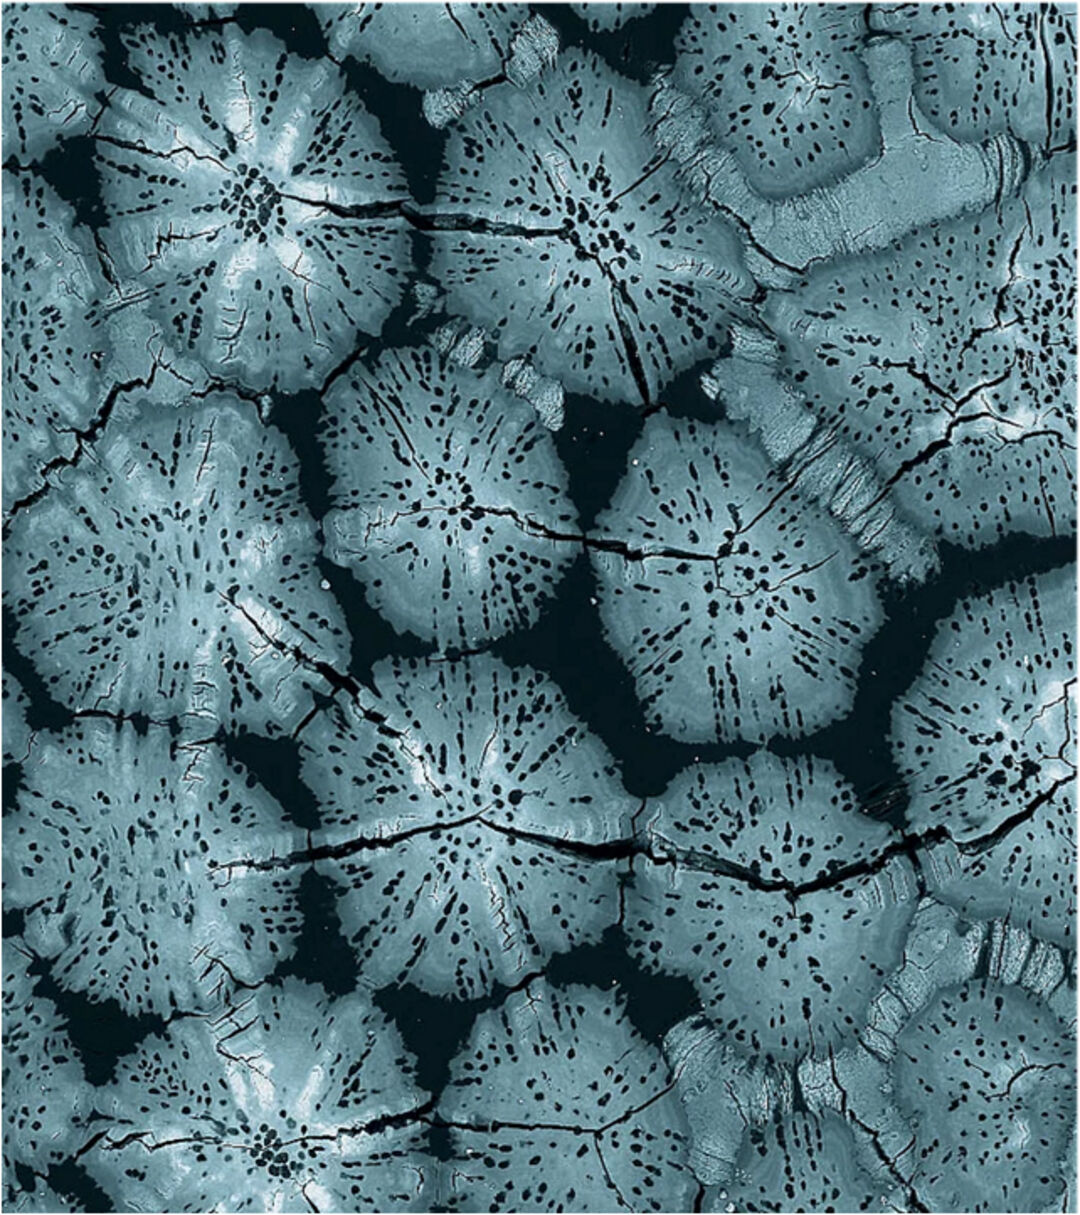 Tesselation in biology. Copyright: Mason Dean, Max Planck Institute of Colloids and Interfaces; James Weaver, Wyss Institute
